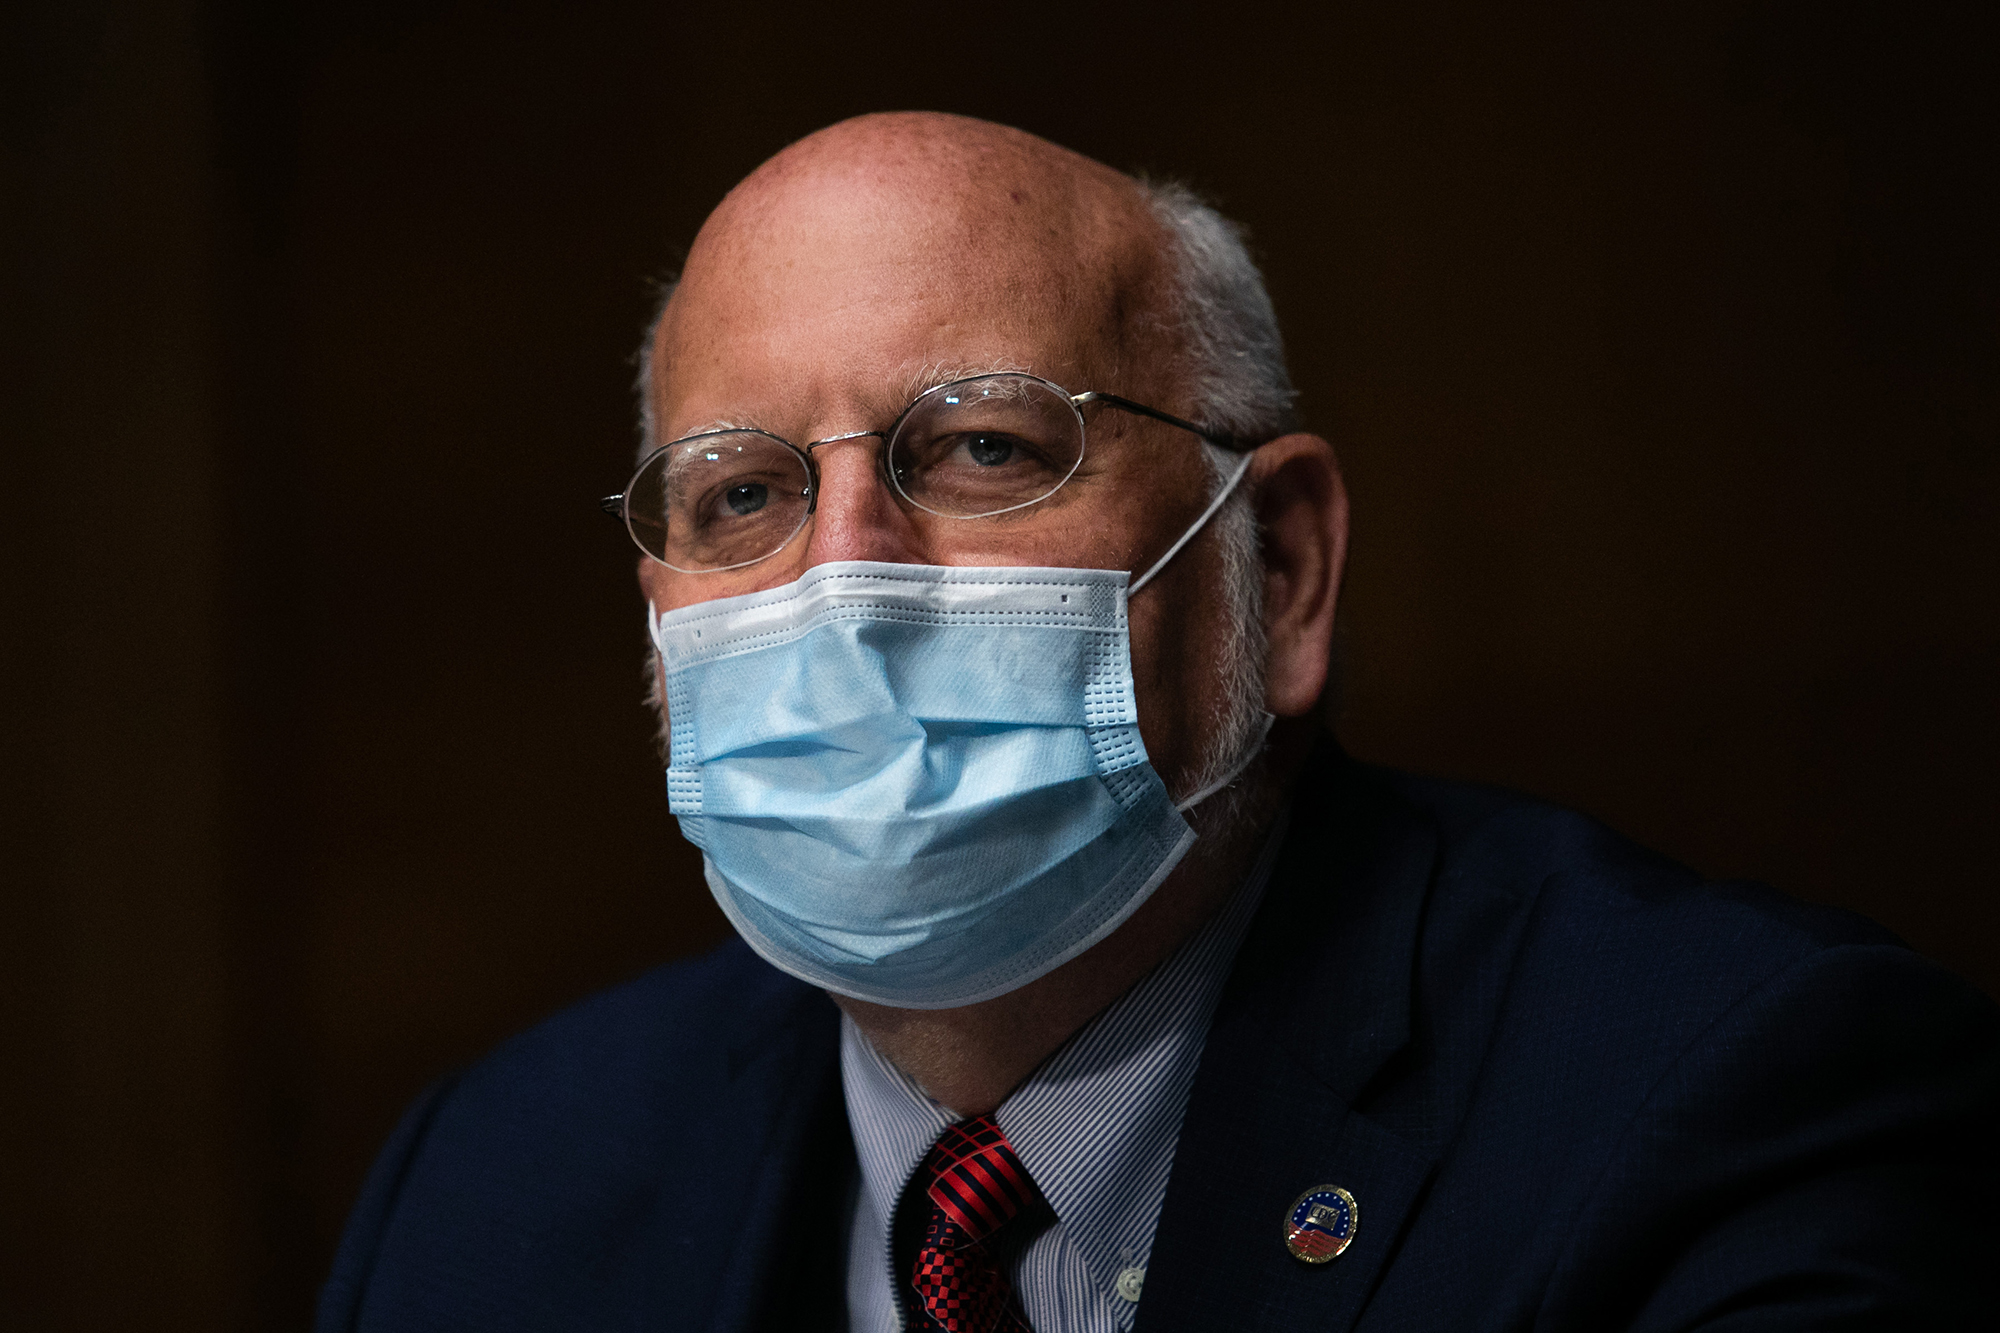 CDC Director Dr. Robert R. Redfield testifying at a Senate Labor, Health and Human Services, Education and Related Agencies Subcommittee hearing on Capitol Hill on July 2, 2020 in Washington, DC.